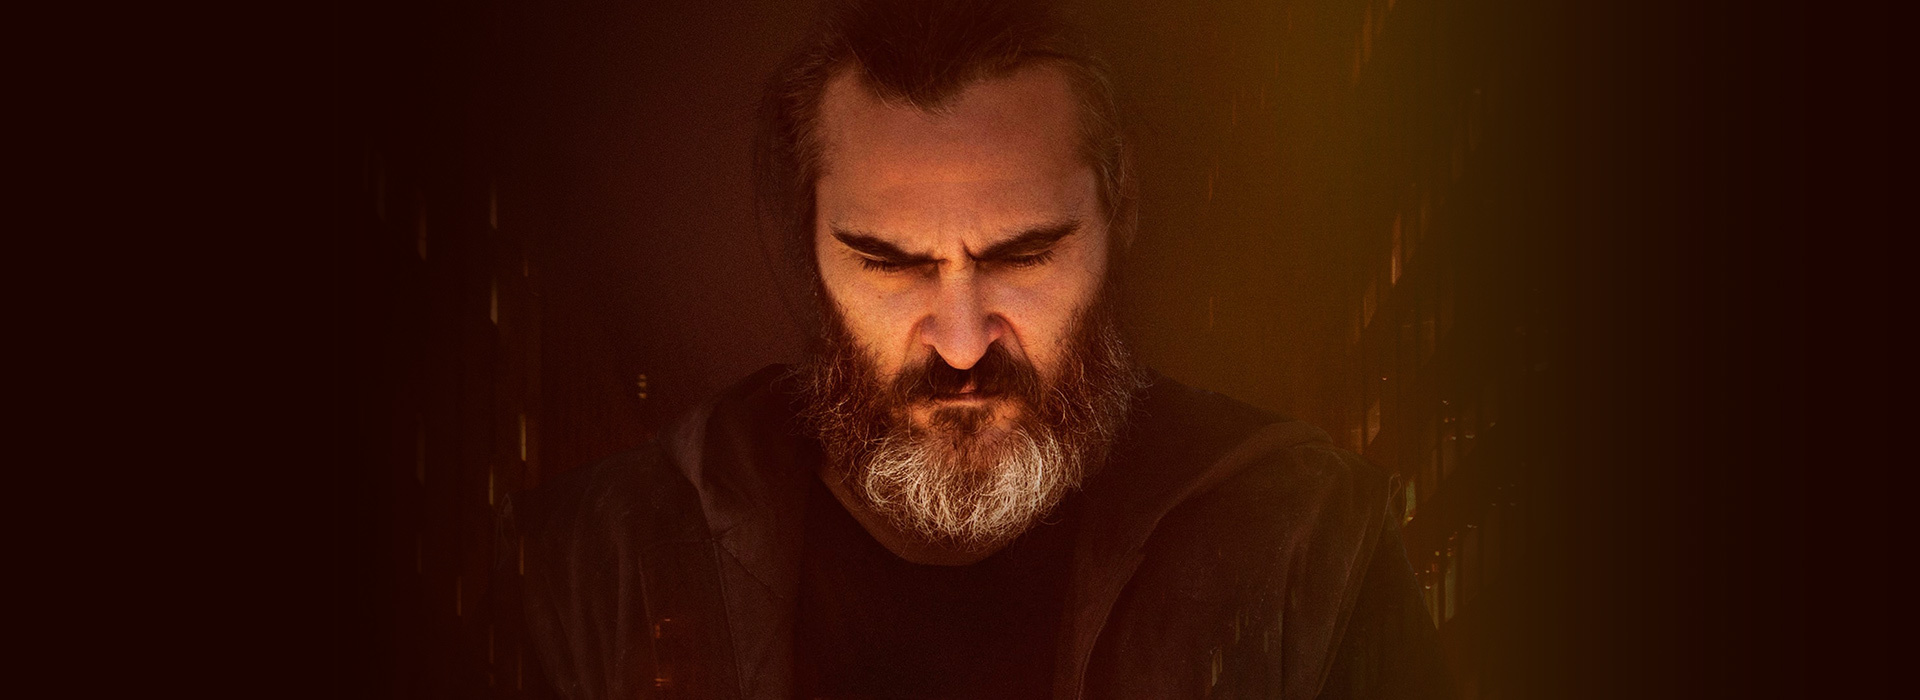 Movie poster You Were Never Really Here